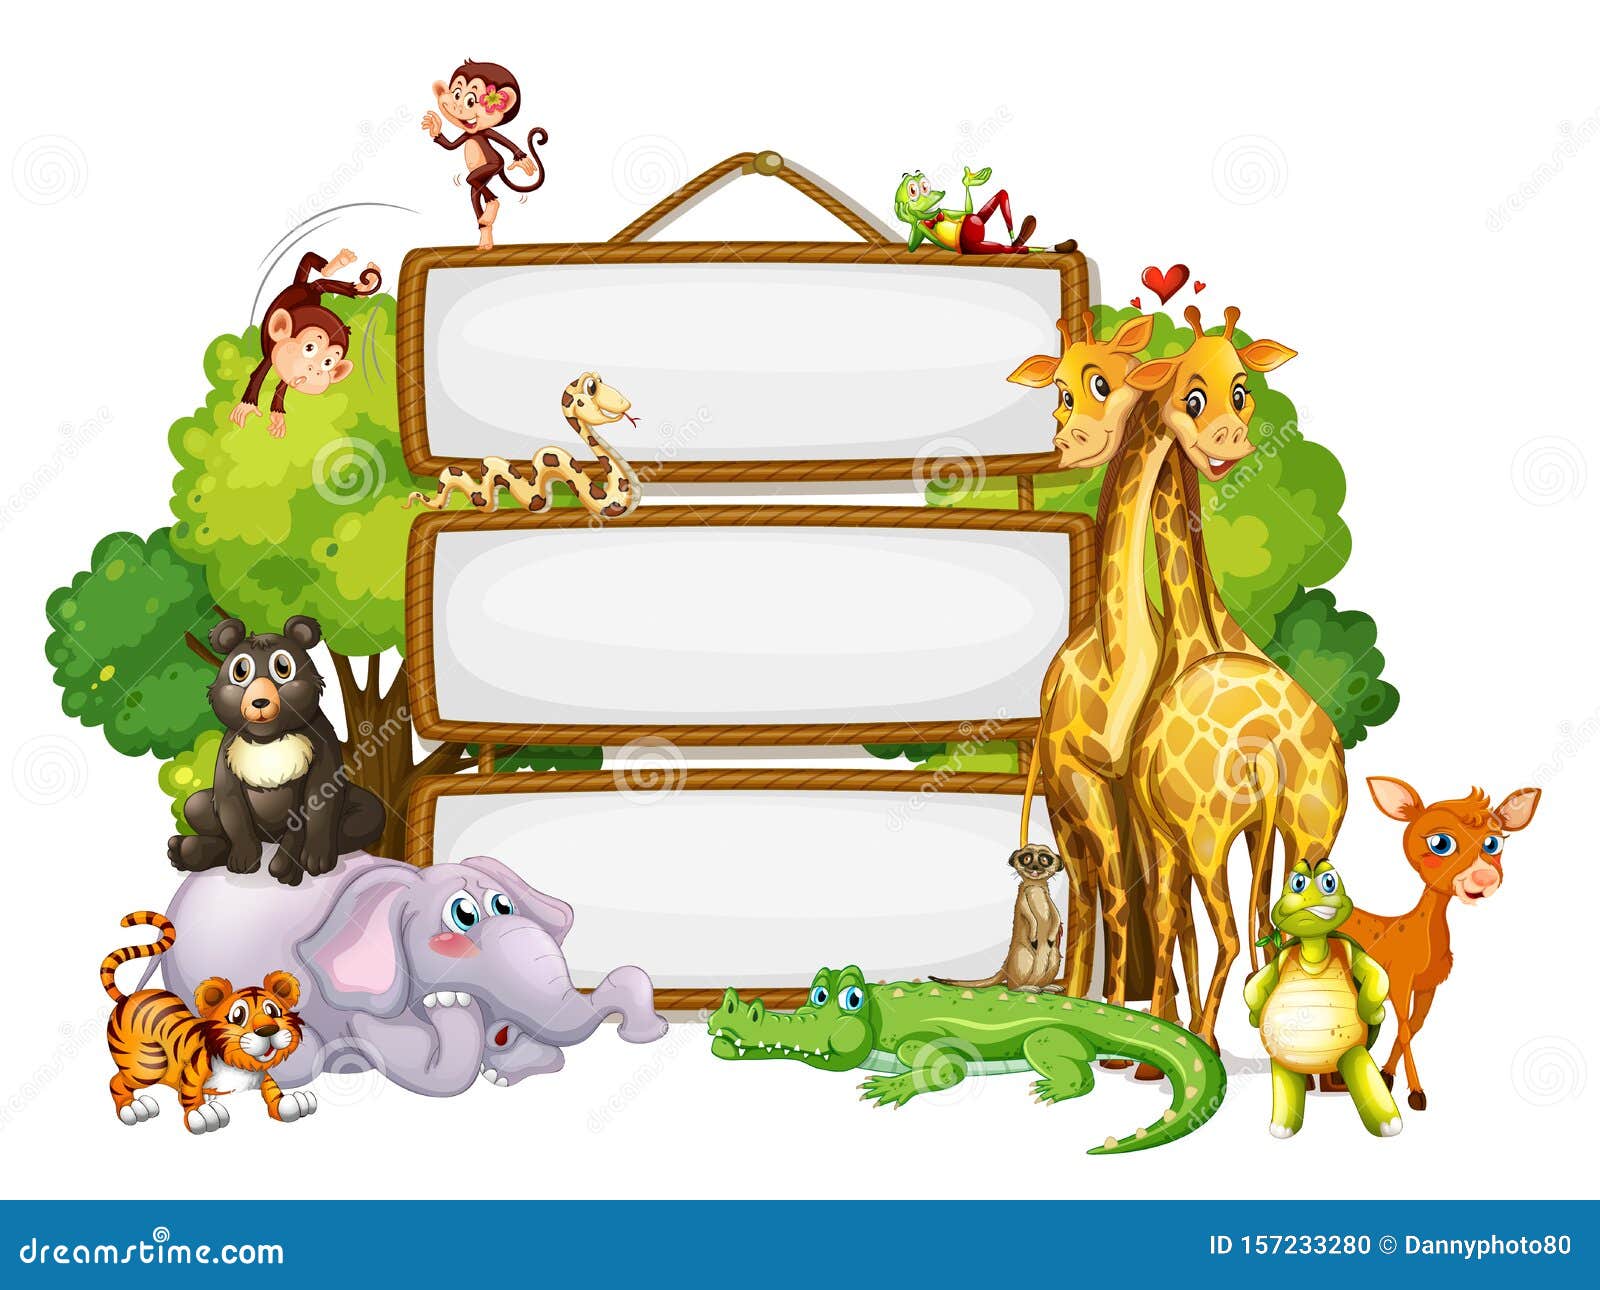 Border Template Design with Cute Animals Stock Vector - Illustration of  board, park: 157233280